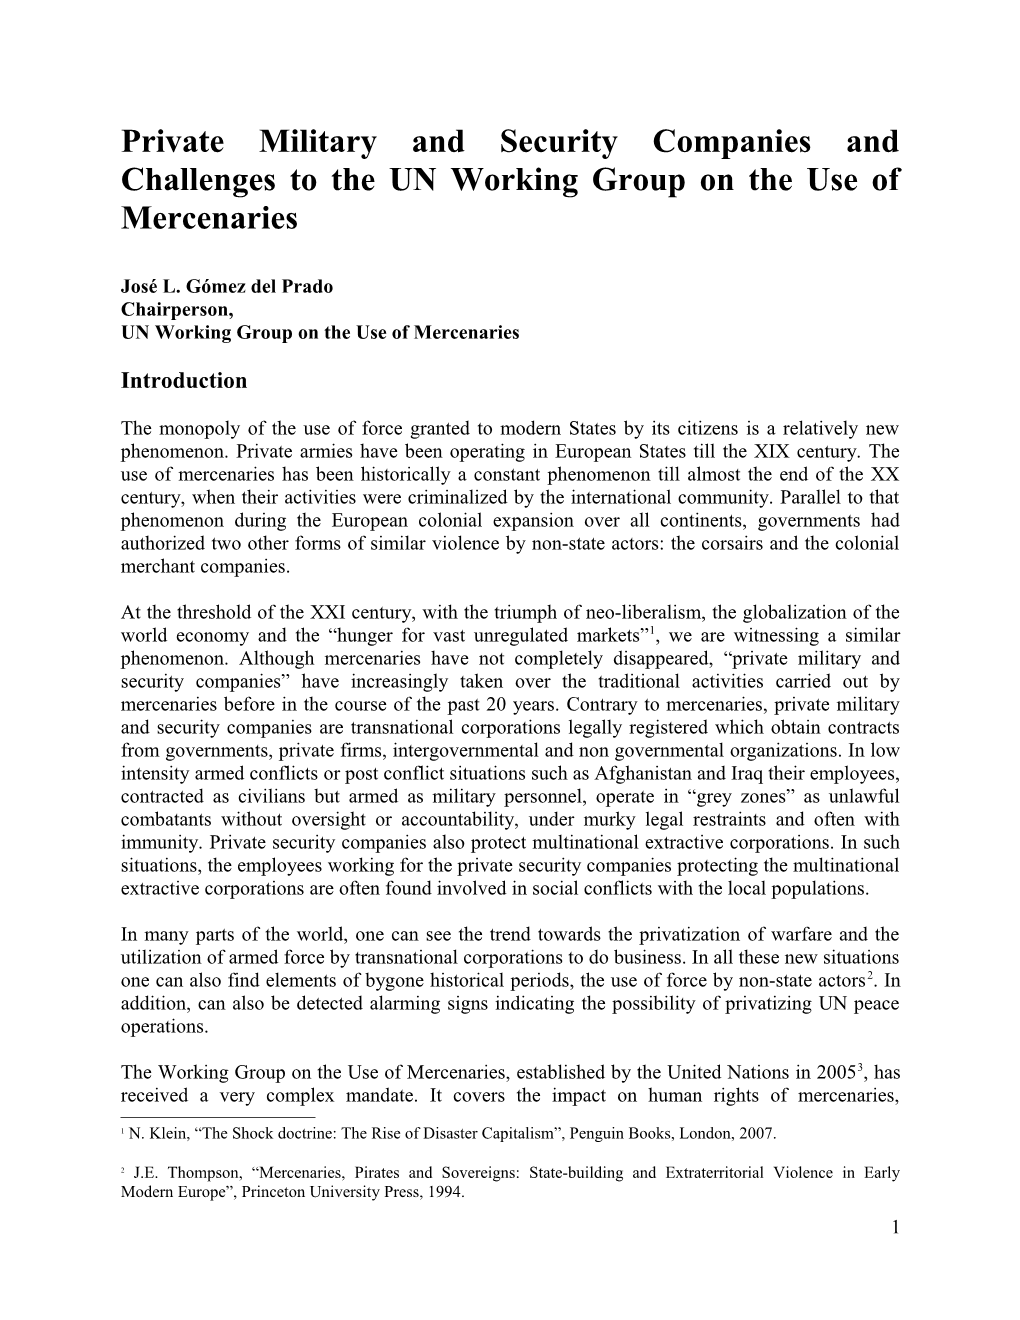 Private Military and Security Companies and Challenges to the UN Working Group on the Use